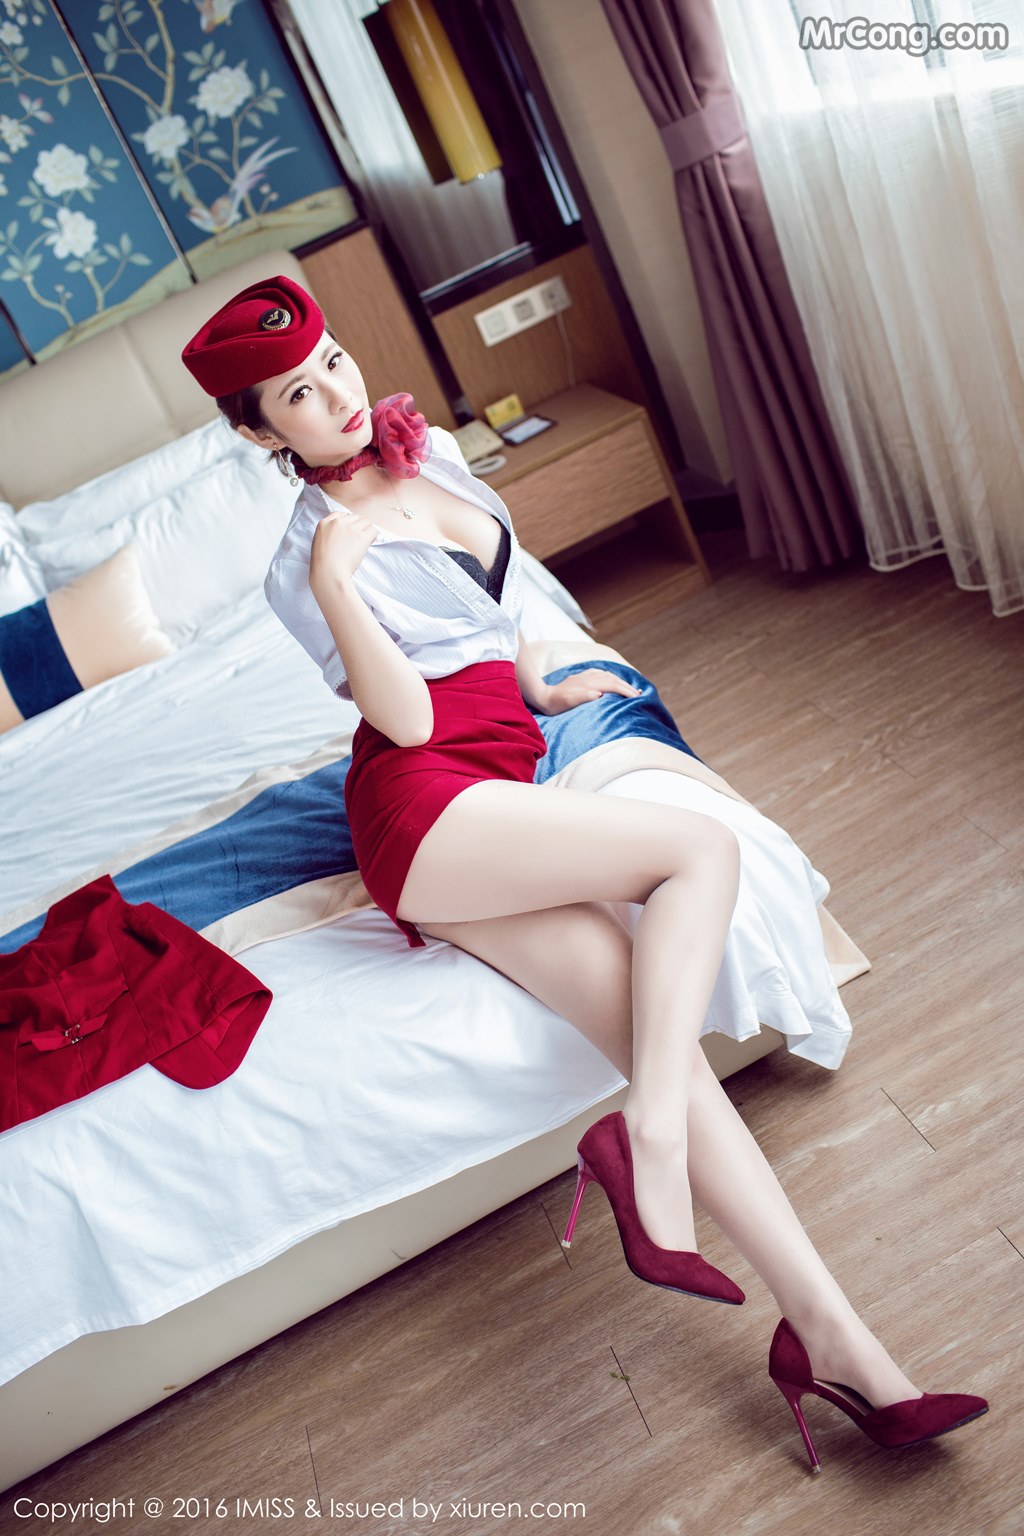 IMISS Vol.082: Lily Model (莉莉) (51 pictures) photo 1-19